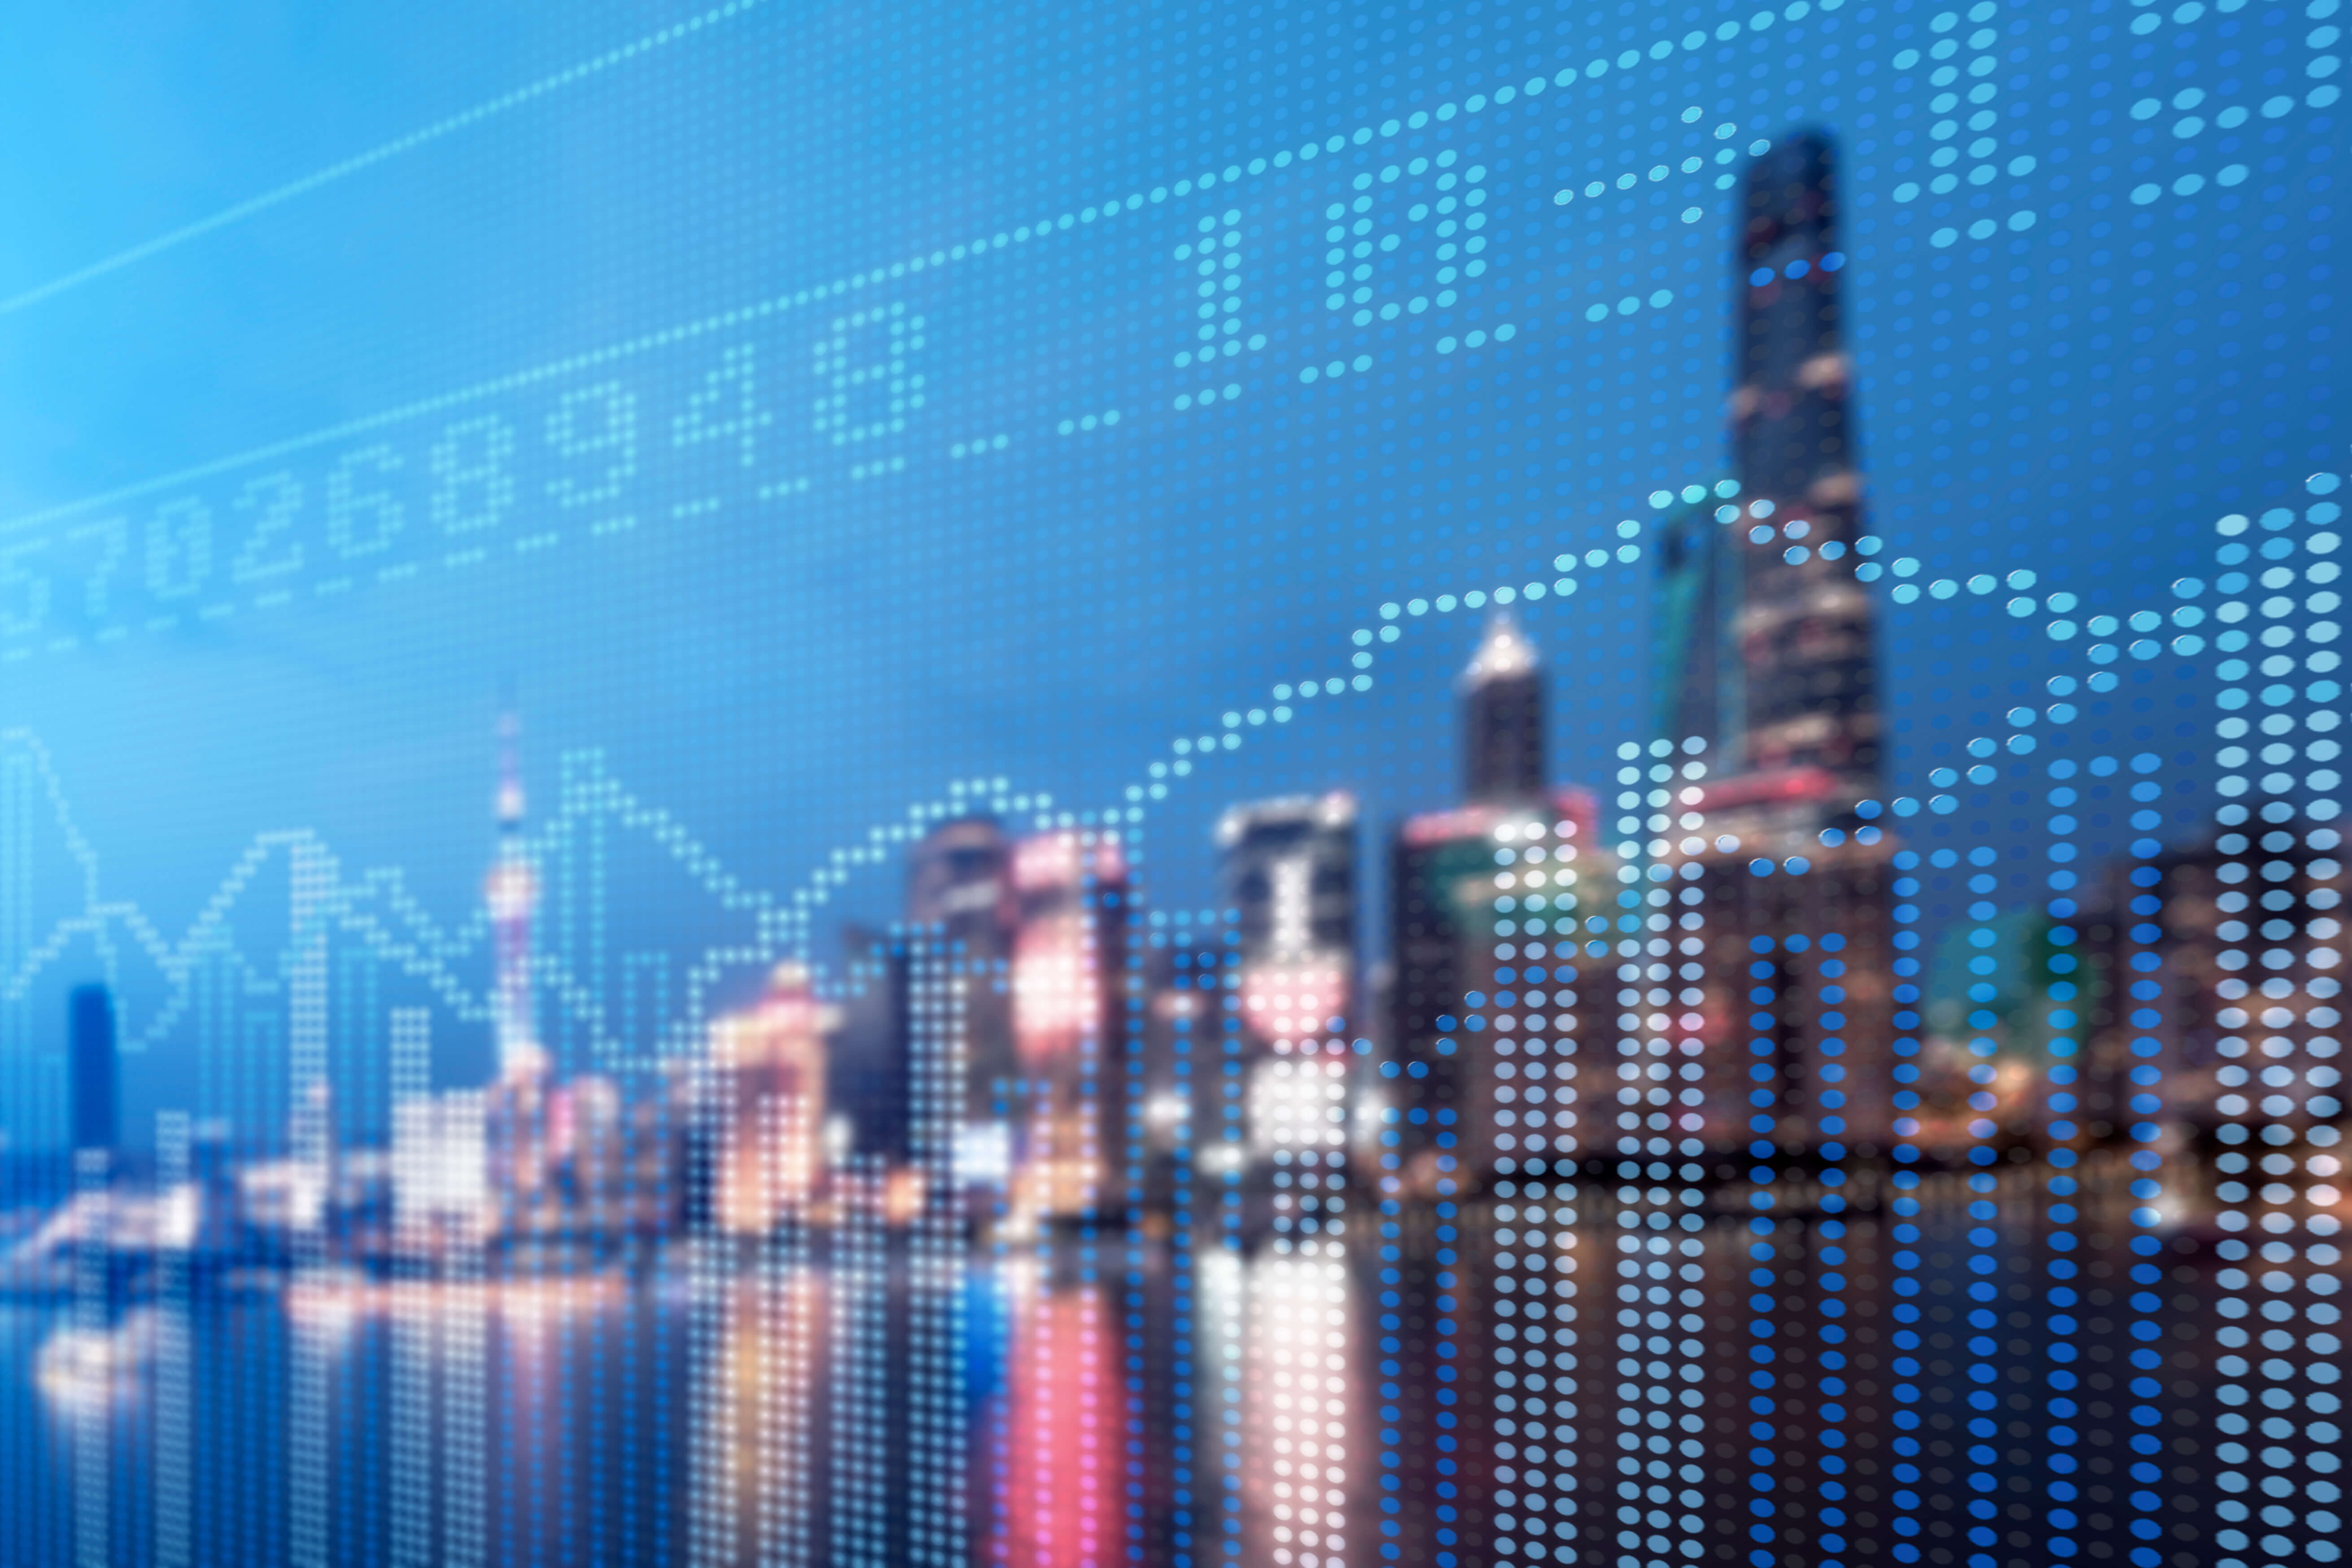 A stock image of stock investment graphs on a city landscape photo